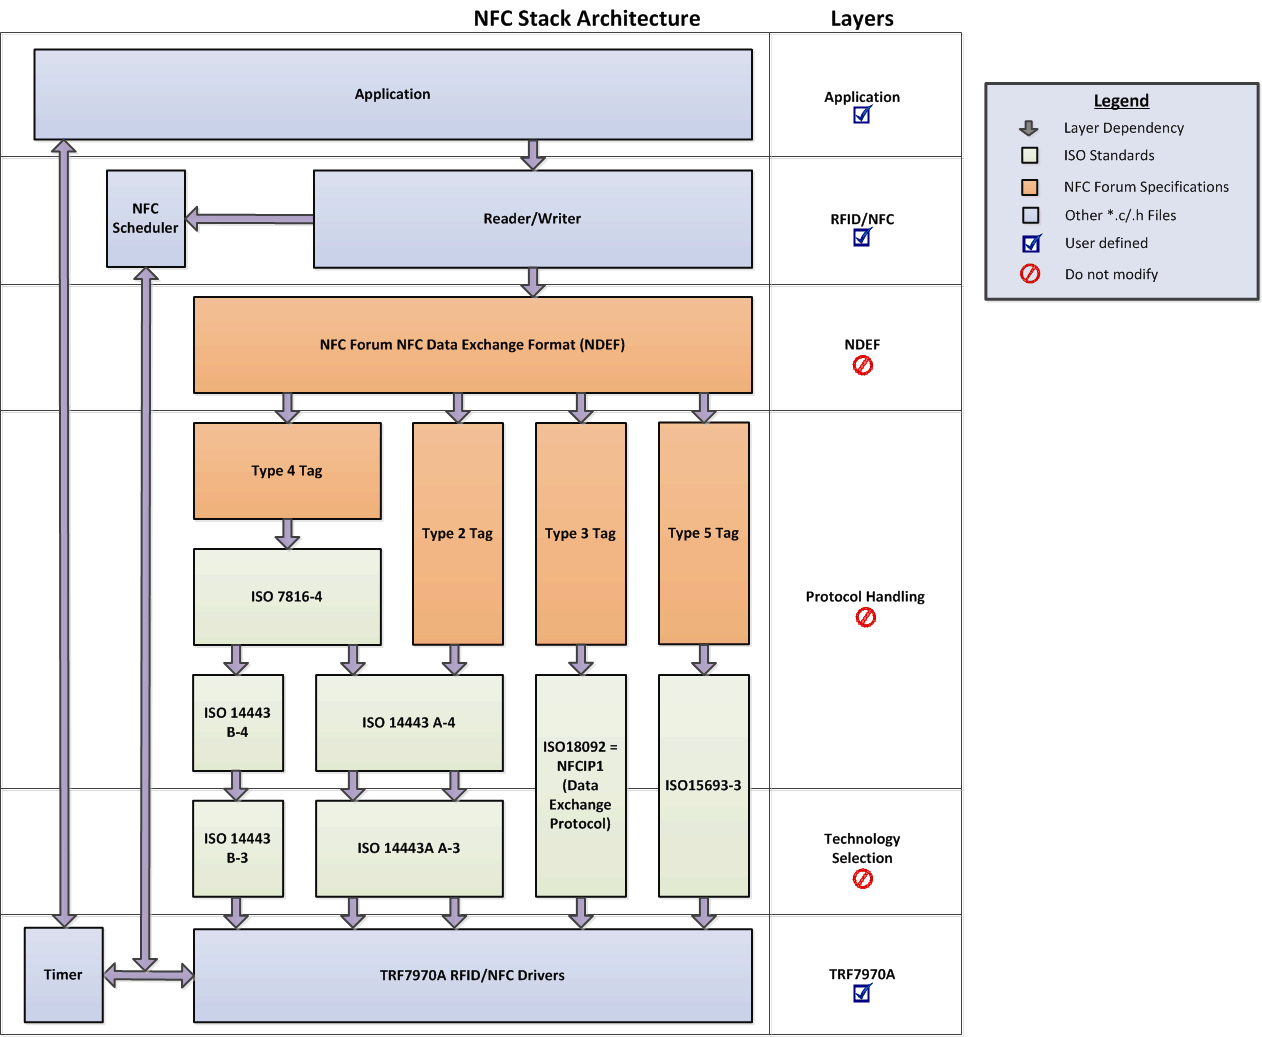 fig26_RW_NFC_Stack_Architecture.gif